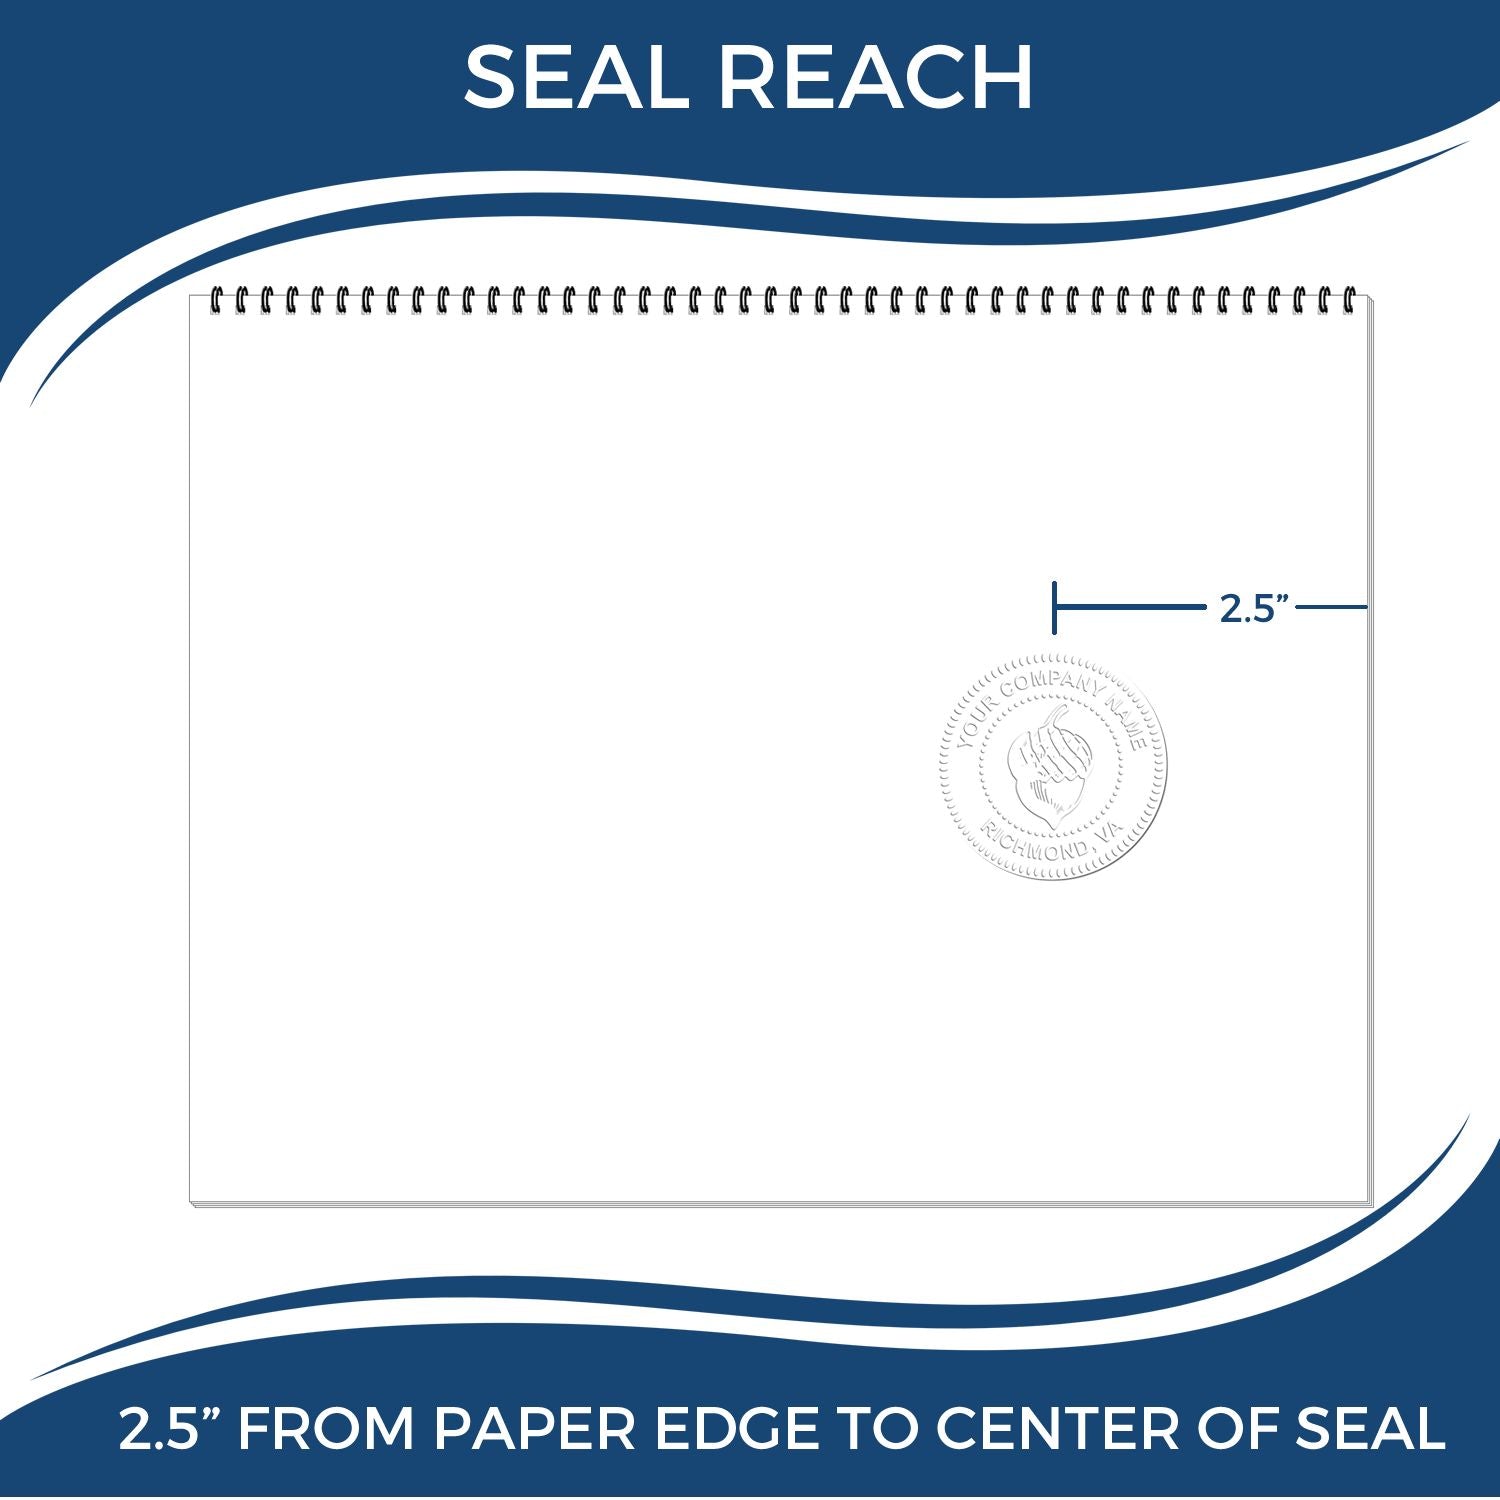 An infographic showing the seal reach which is represented by a ruler and a miniature seal image of the Heavy Duty Cast Iron Oklahoma Engineer Seal Embosser